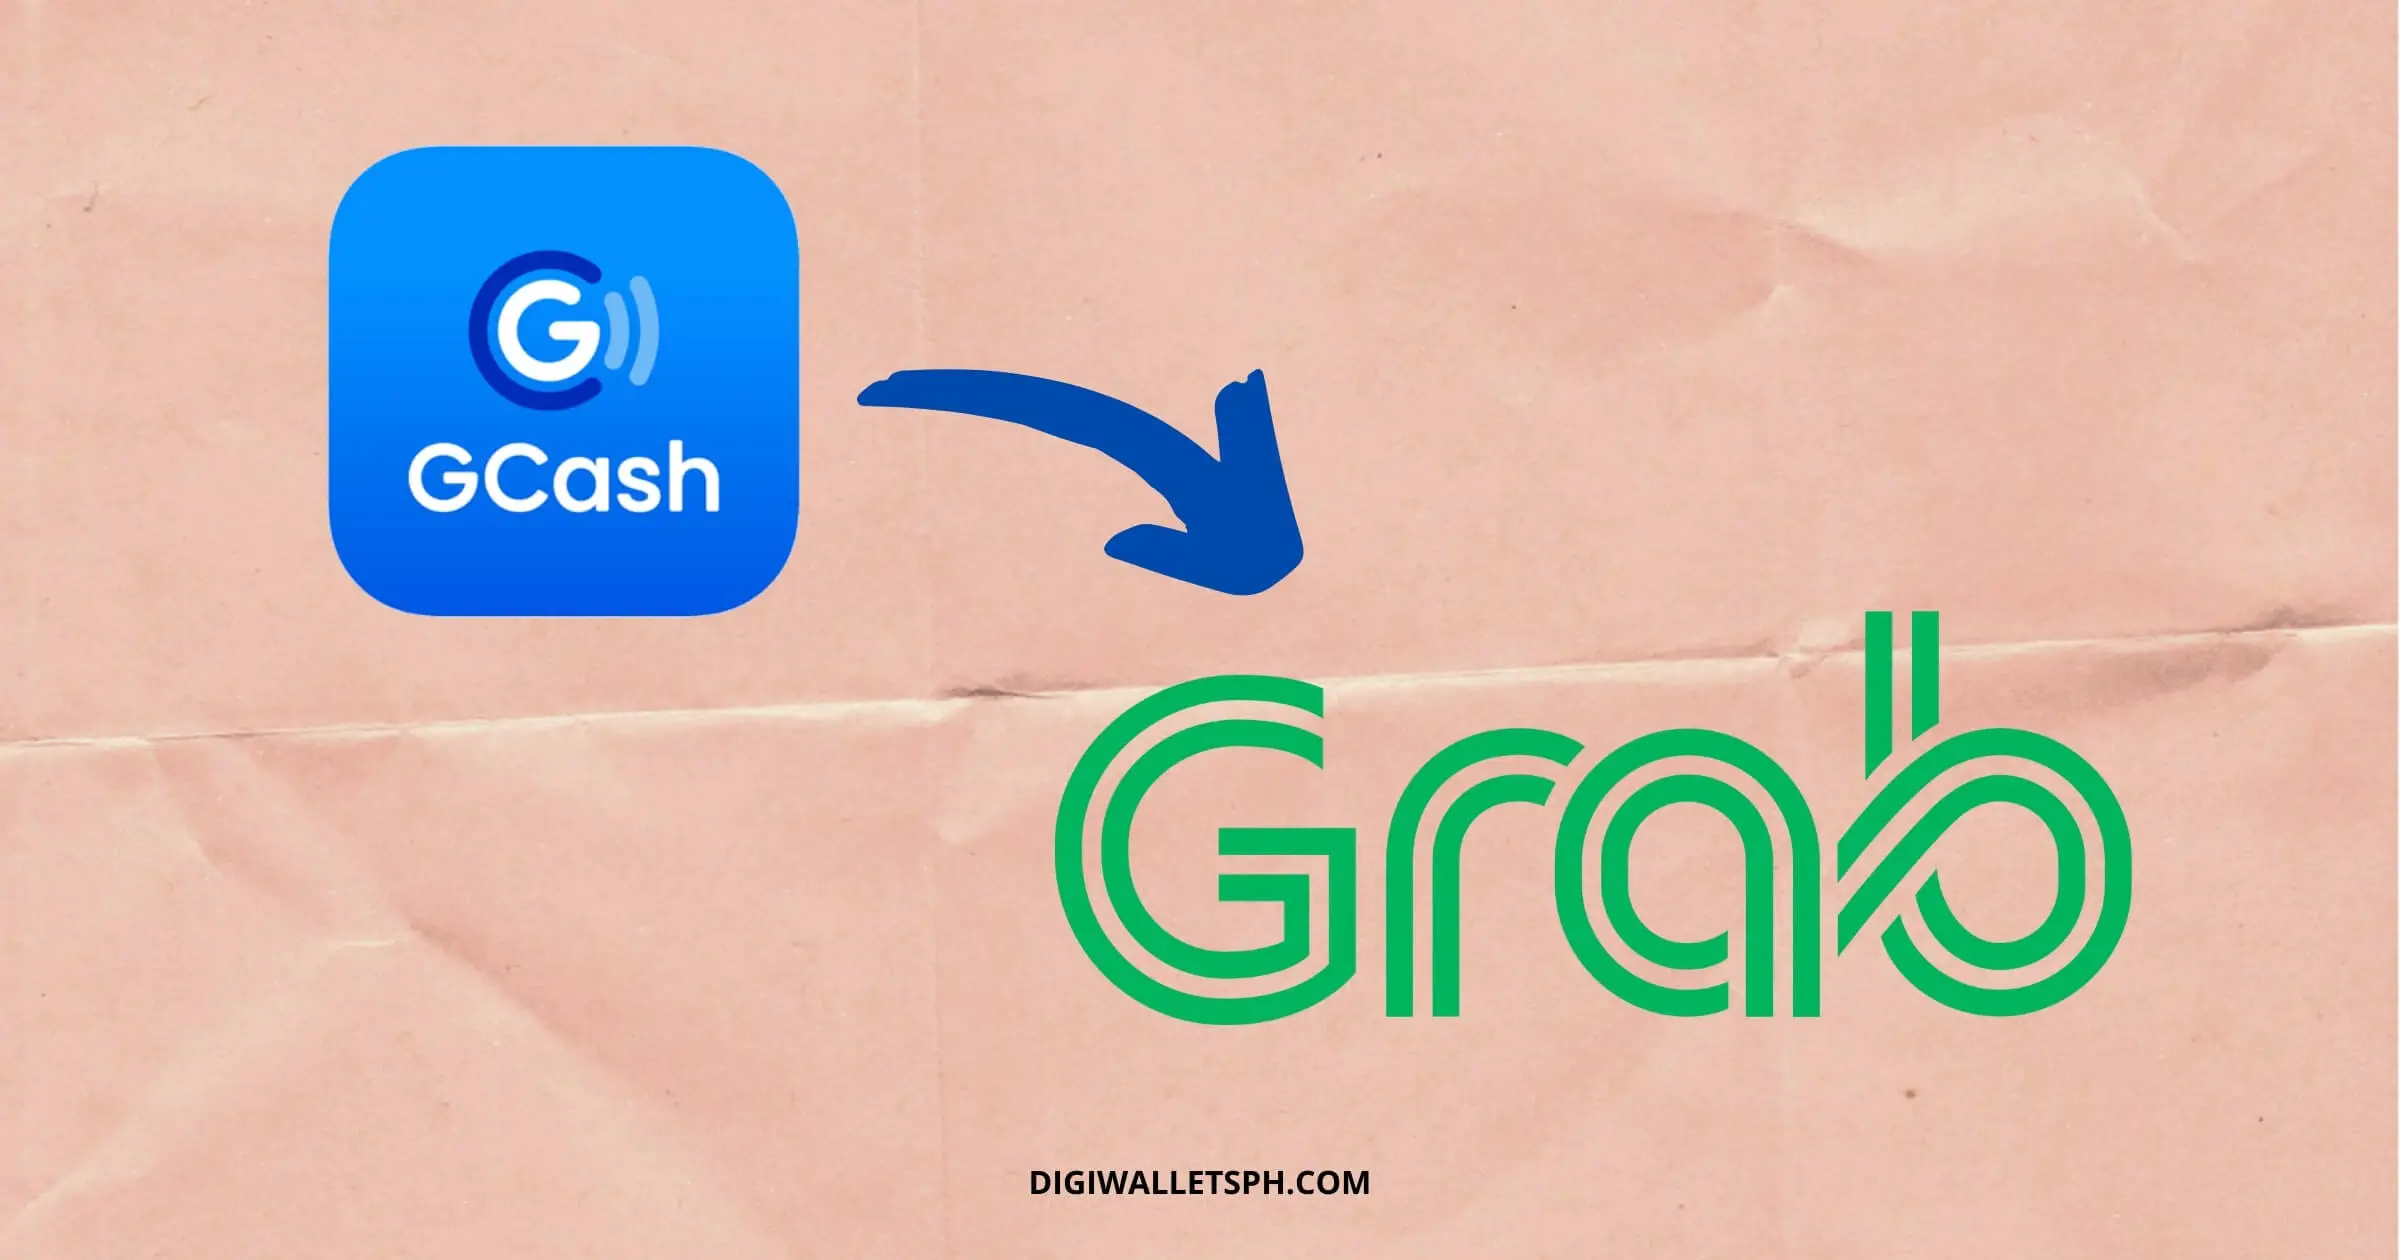 How to send money from GCash to Grab wallet